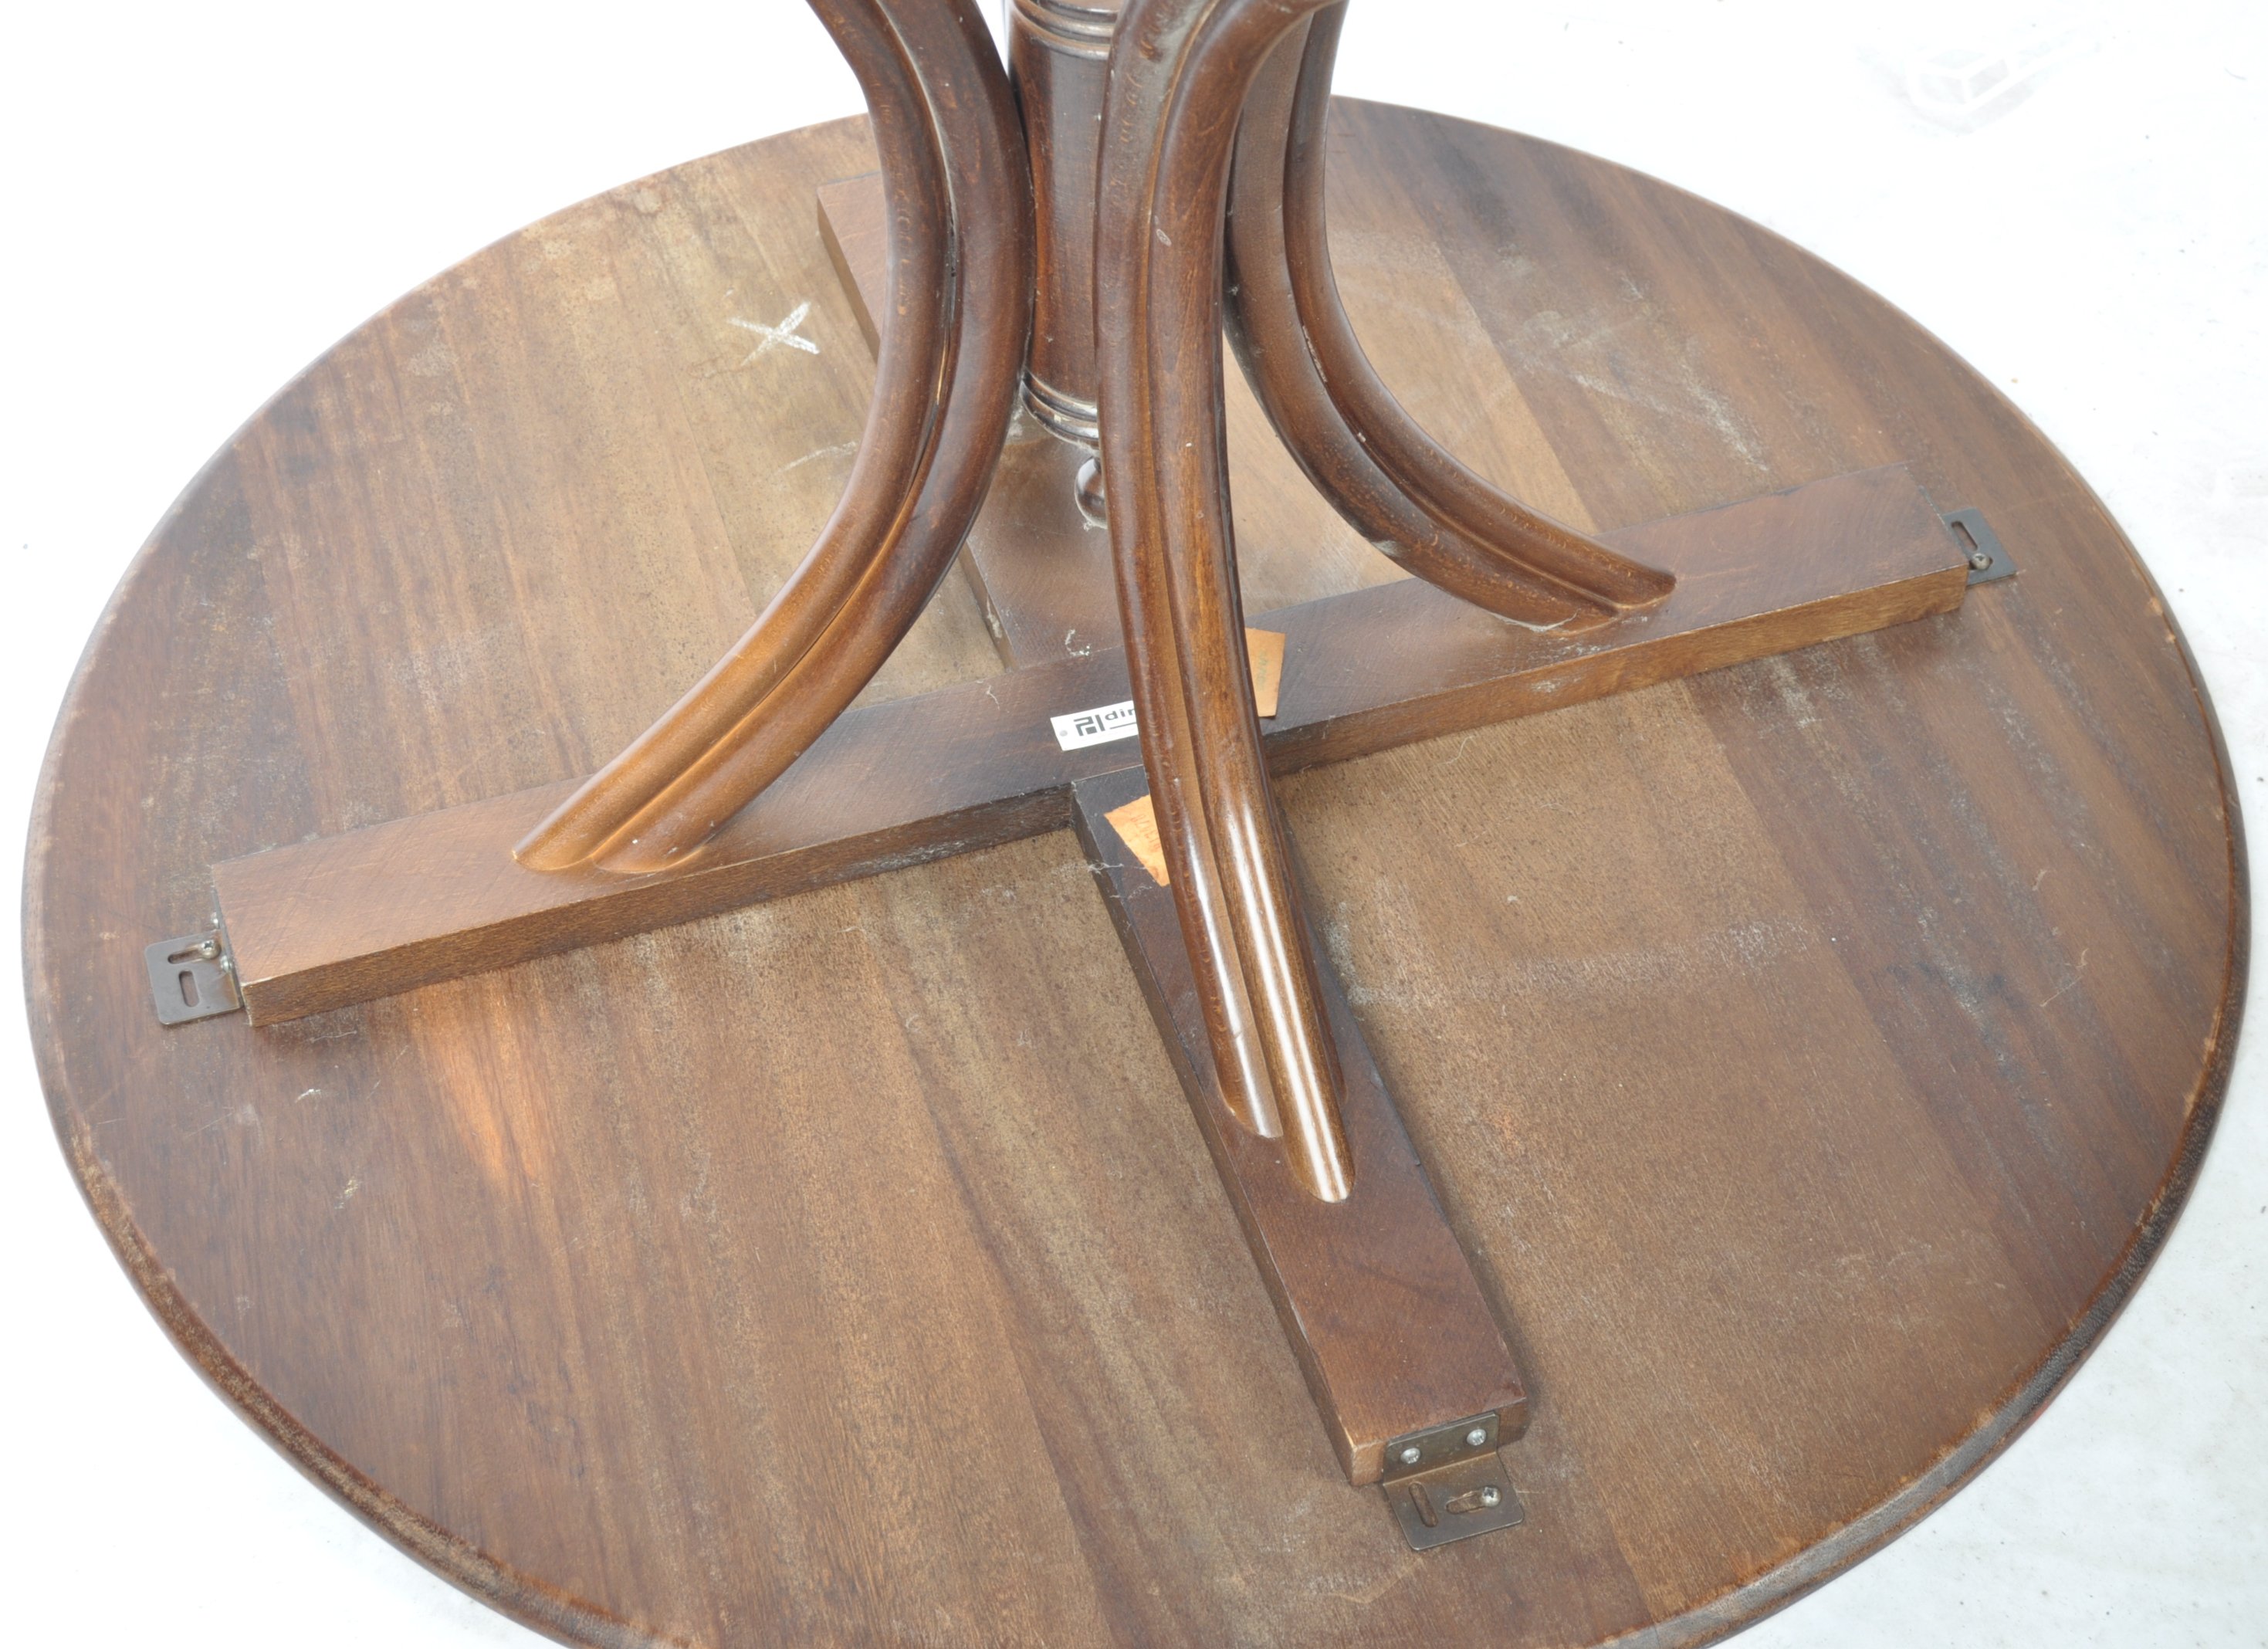 DINETTE MID CENTURY RETRO VINTAGE CAFE / BAR TABLE - Image 6 of 7